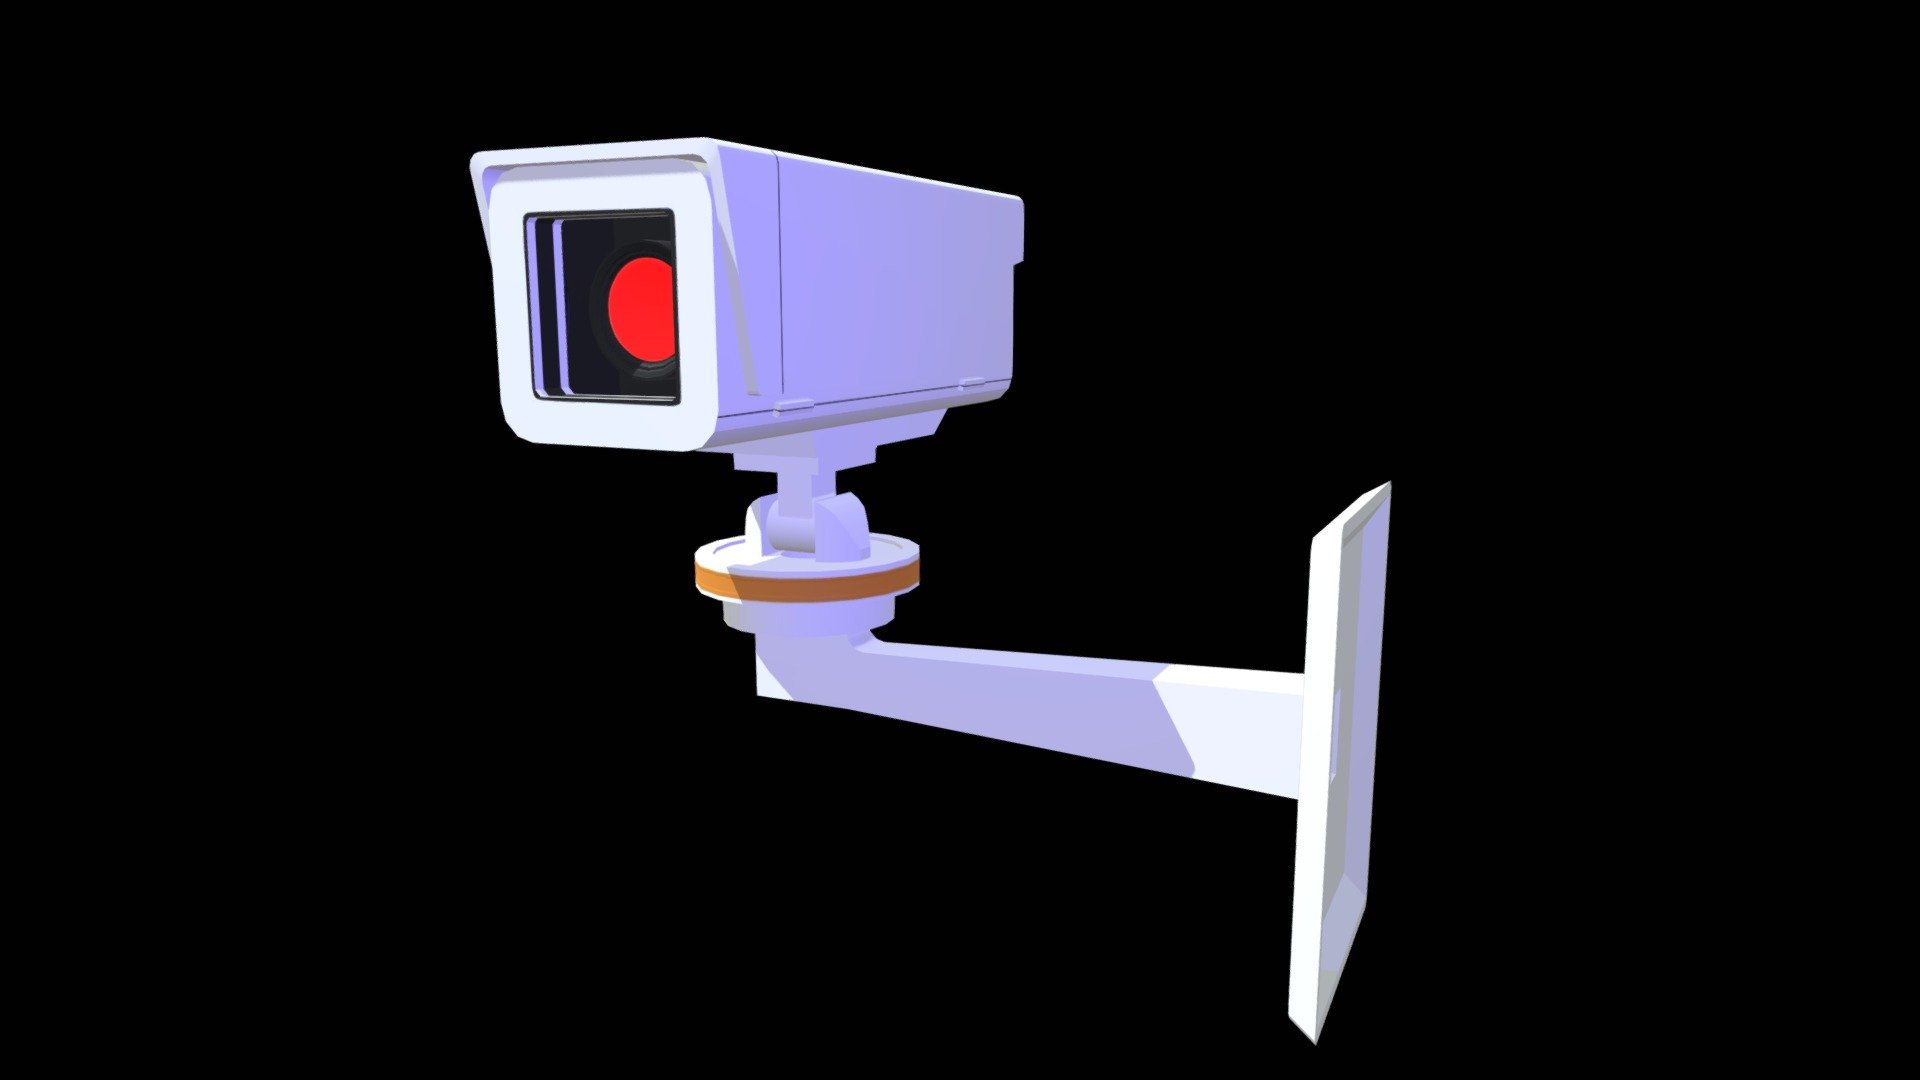 Low Poly Model of a Security Camera - Security Camera - Download Free 3D model by andrea.chierchia 3d model